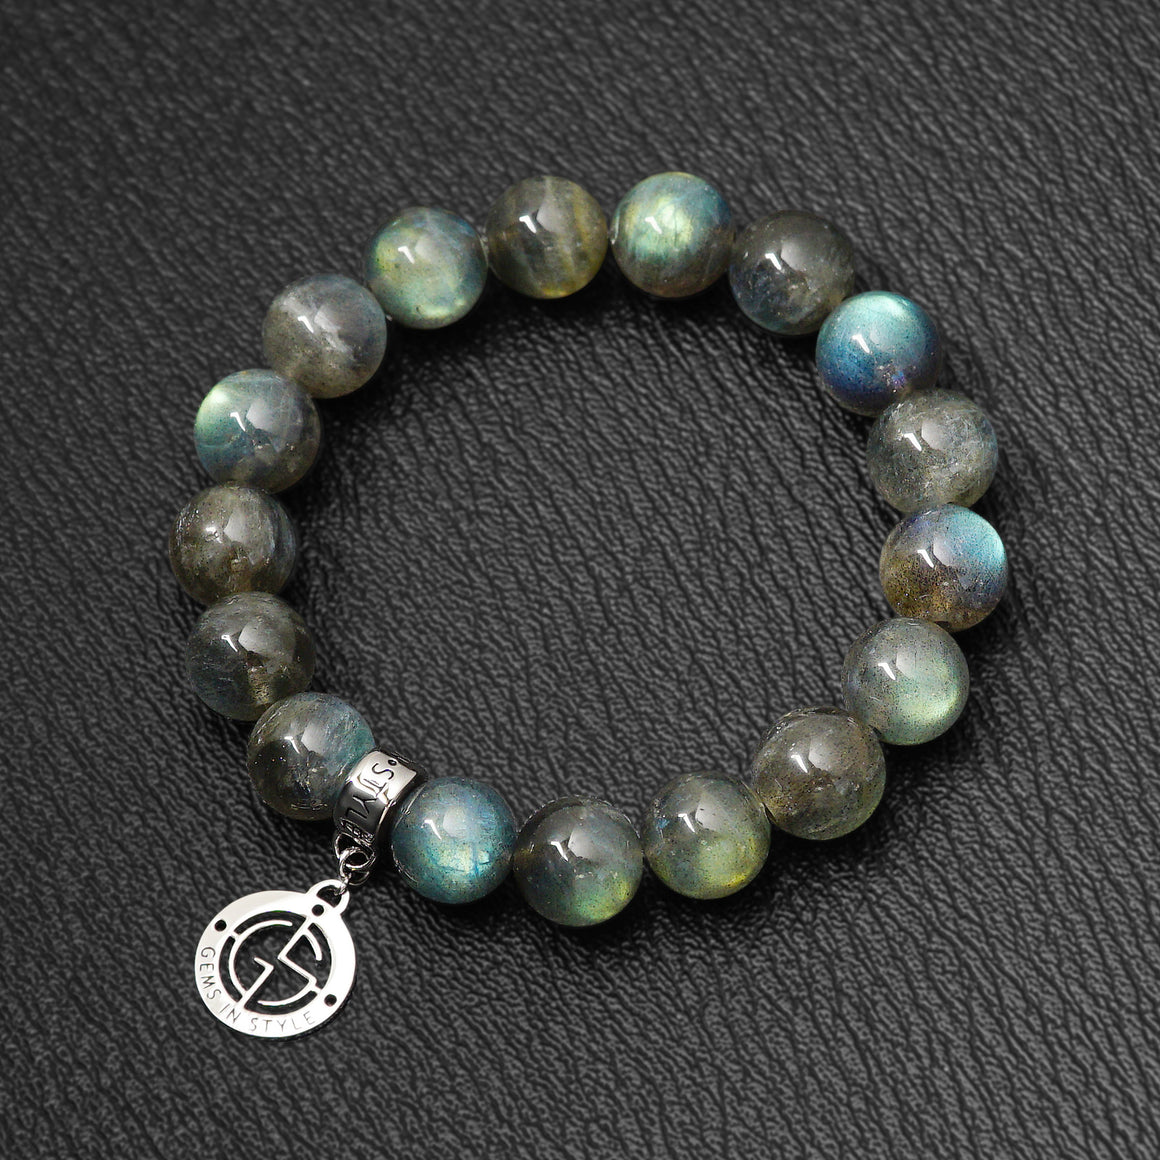 Labradorite gemstone bracelets with silver charm. High quality gemstone with strong colour flashes